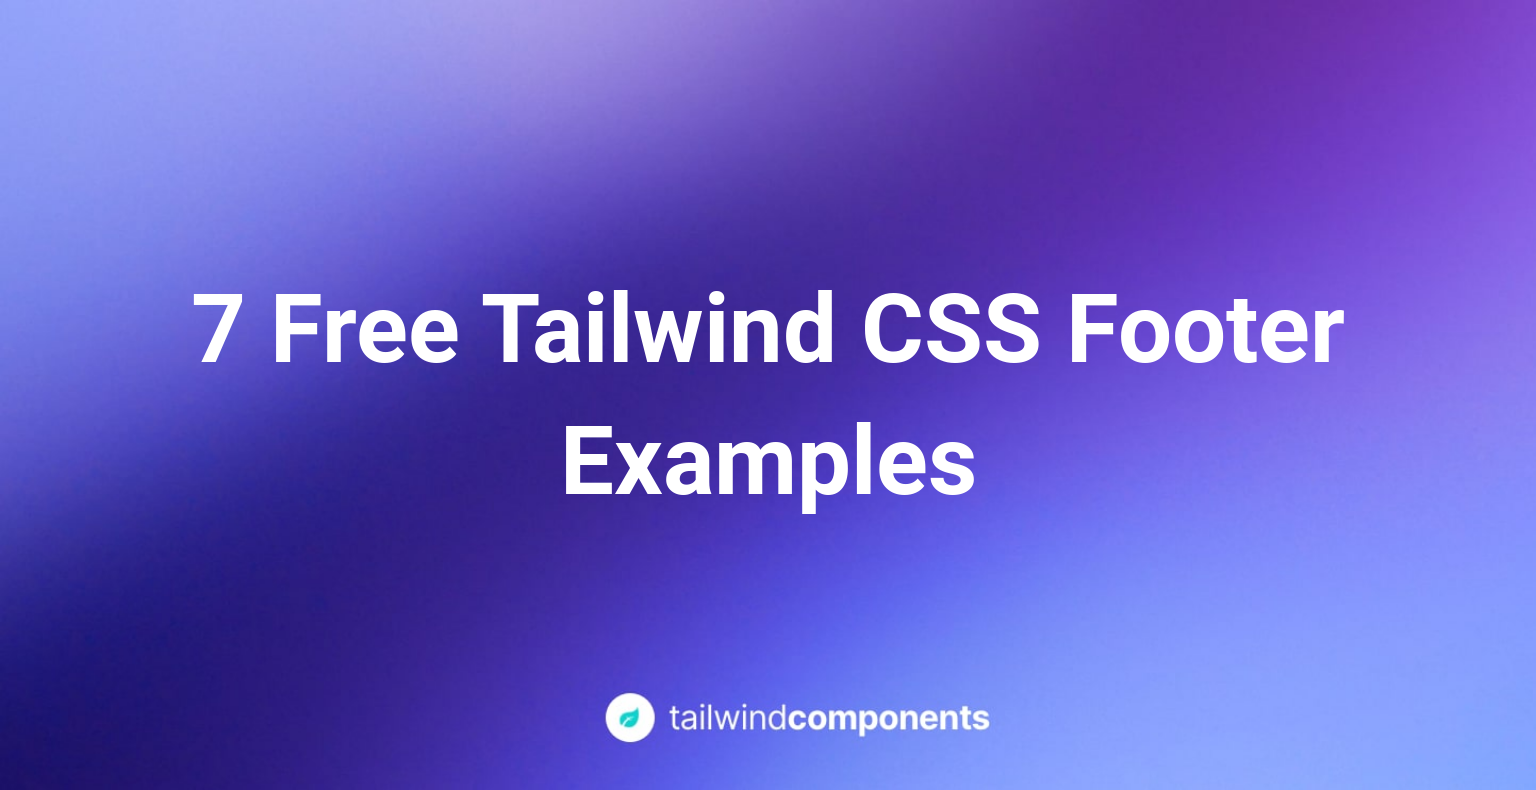 7 Free Tailwind CSS Footer Examples